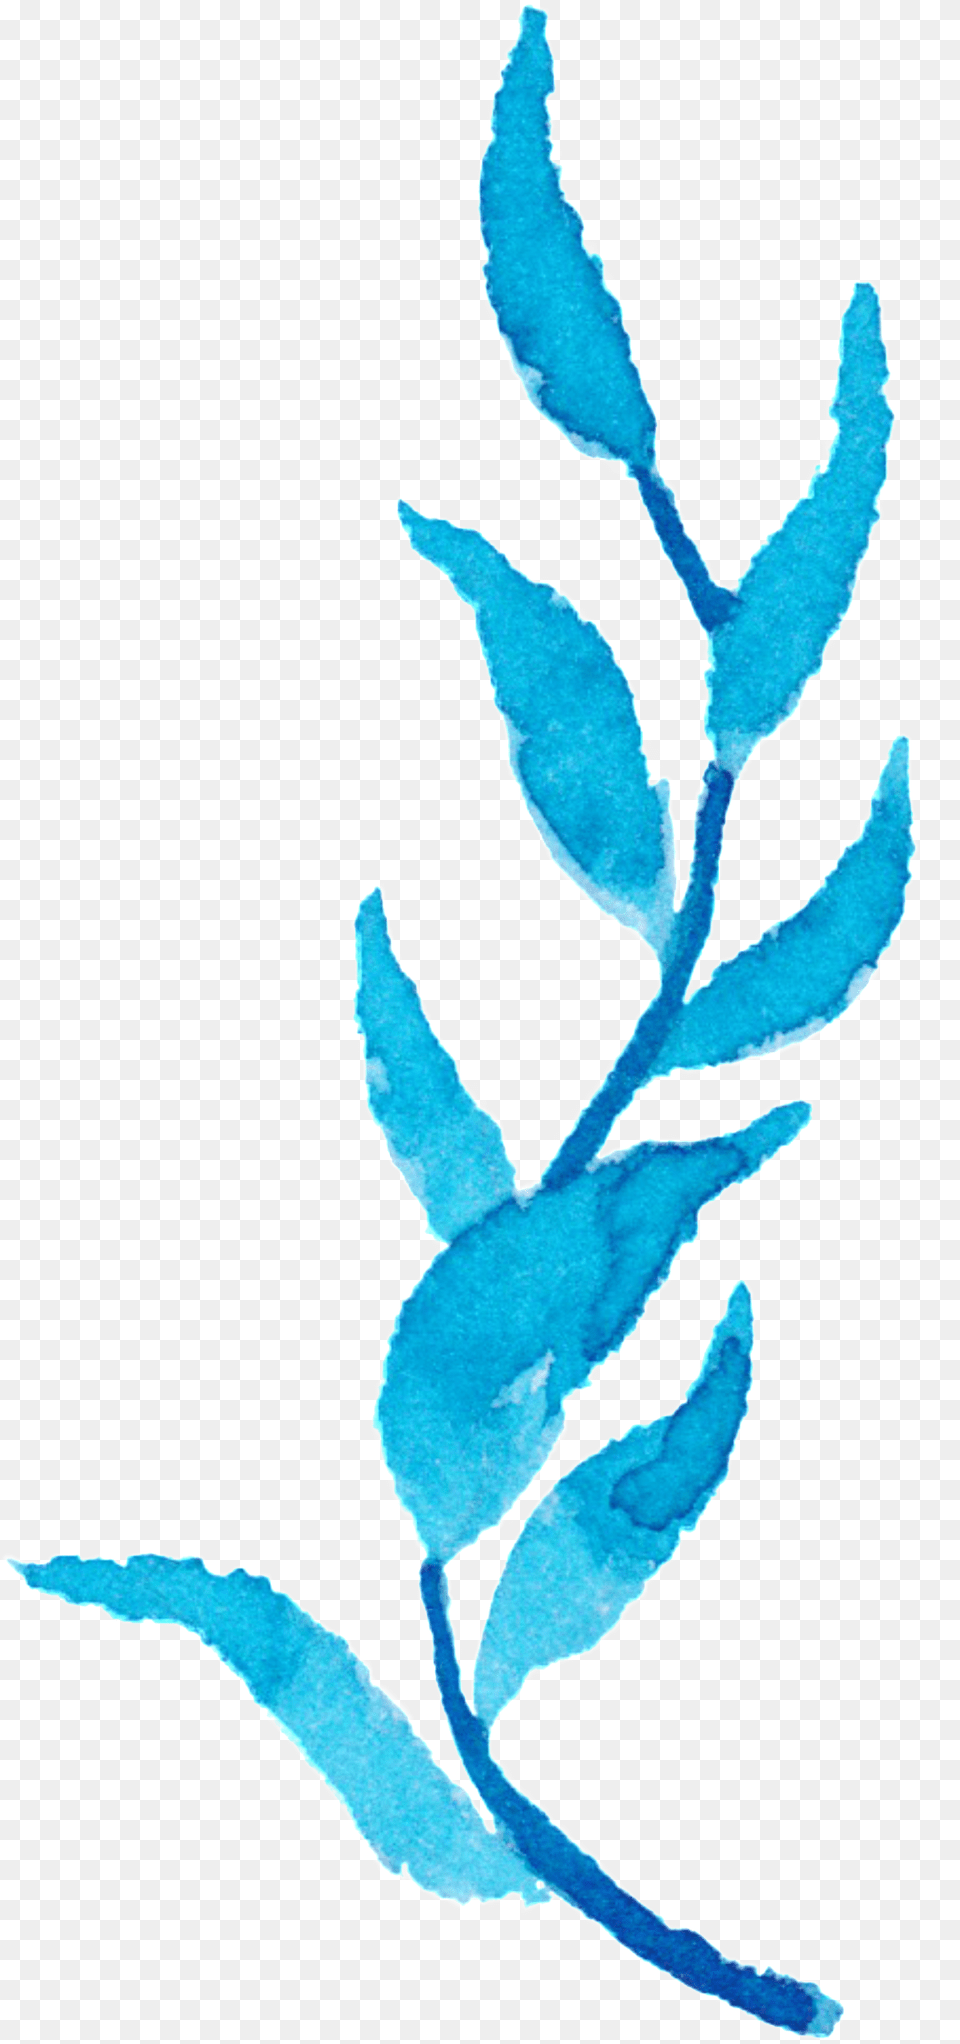 Blue Water Grass Watercolor Hand Painted Flower Decoration Watercolor Painting, Leaf, Plant, Art Png